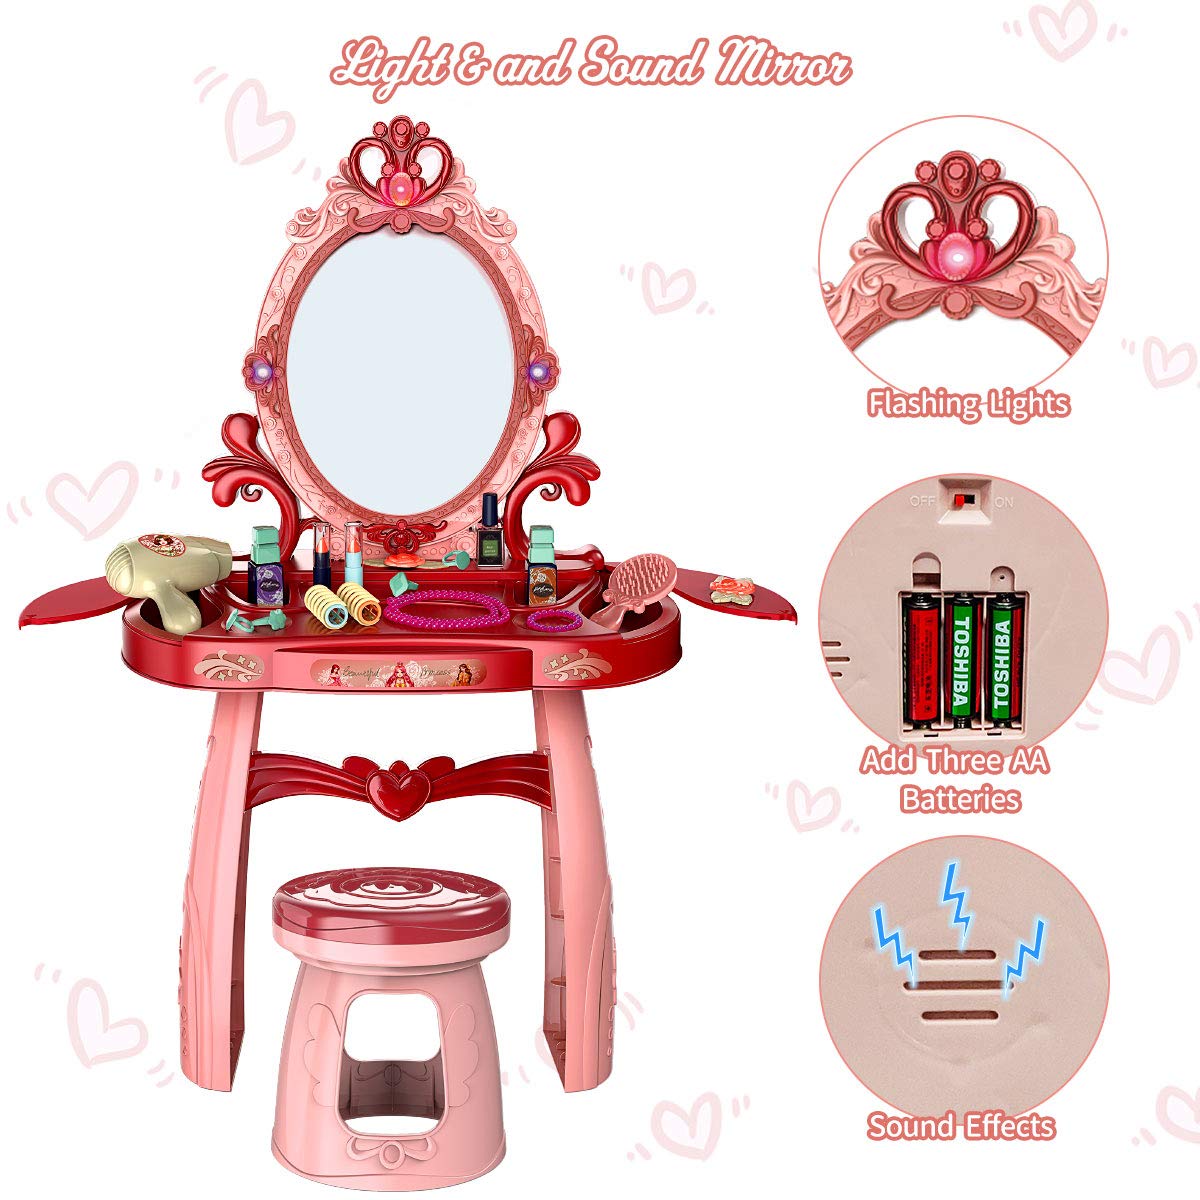 Meland Toddler Vanity Set - Kids Toy Vanity Table for Little Girls with Sound and Light Mirror and Beauty Accessories, Birthday Toys for Little Princess Pretend Play